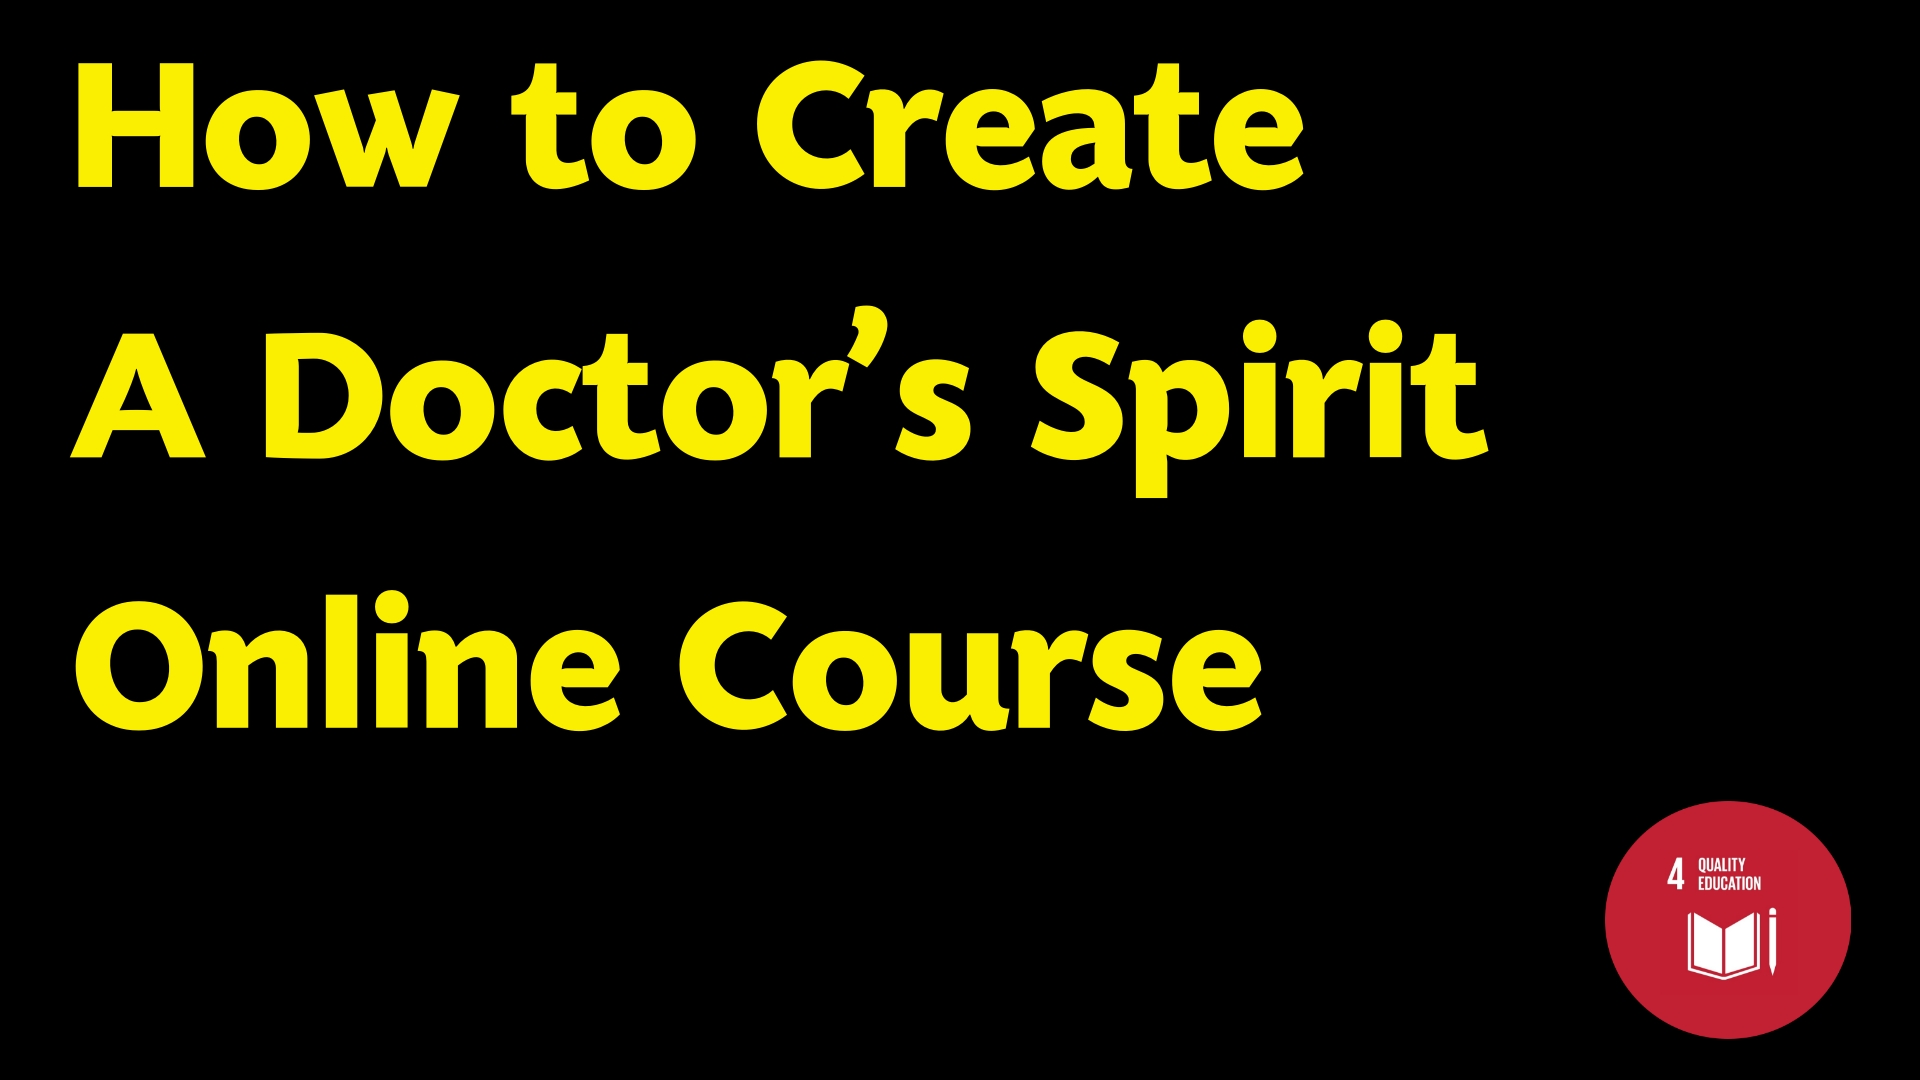 How to Create Doctors’ Spirit: Online Course